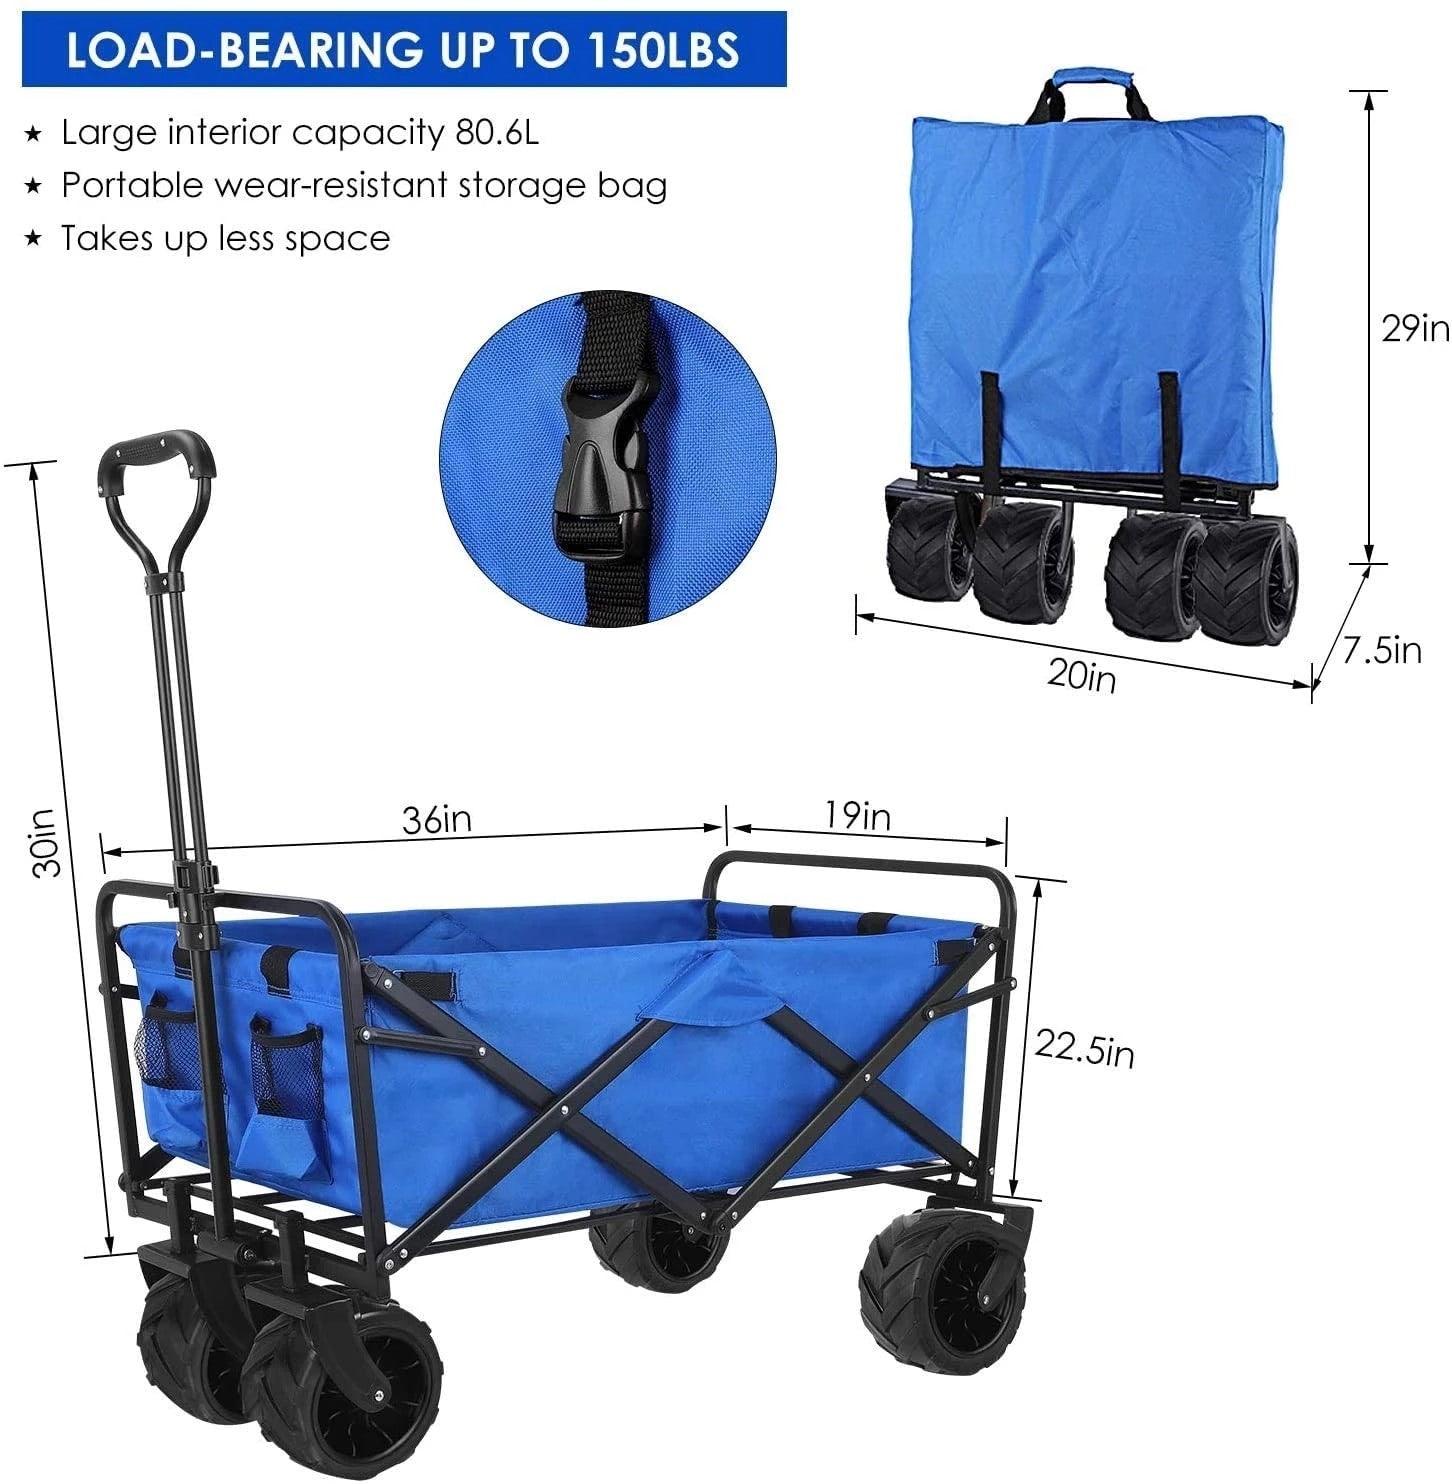 Dog Wagon specifications